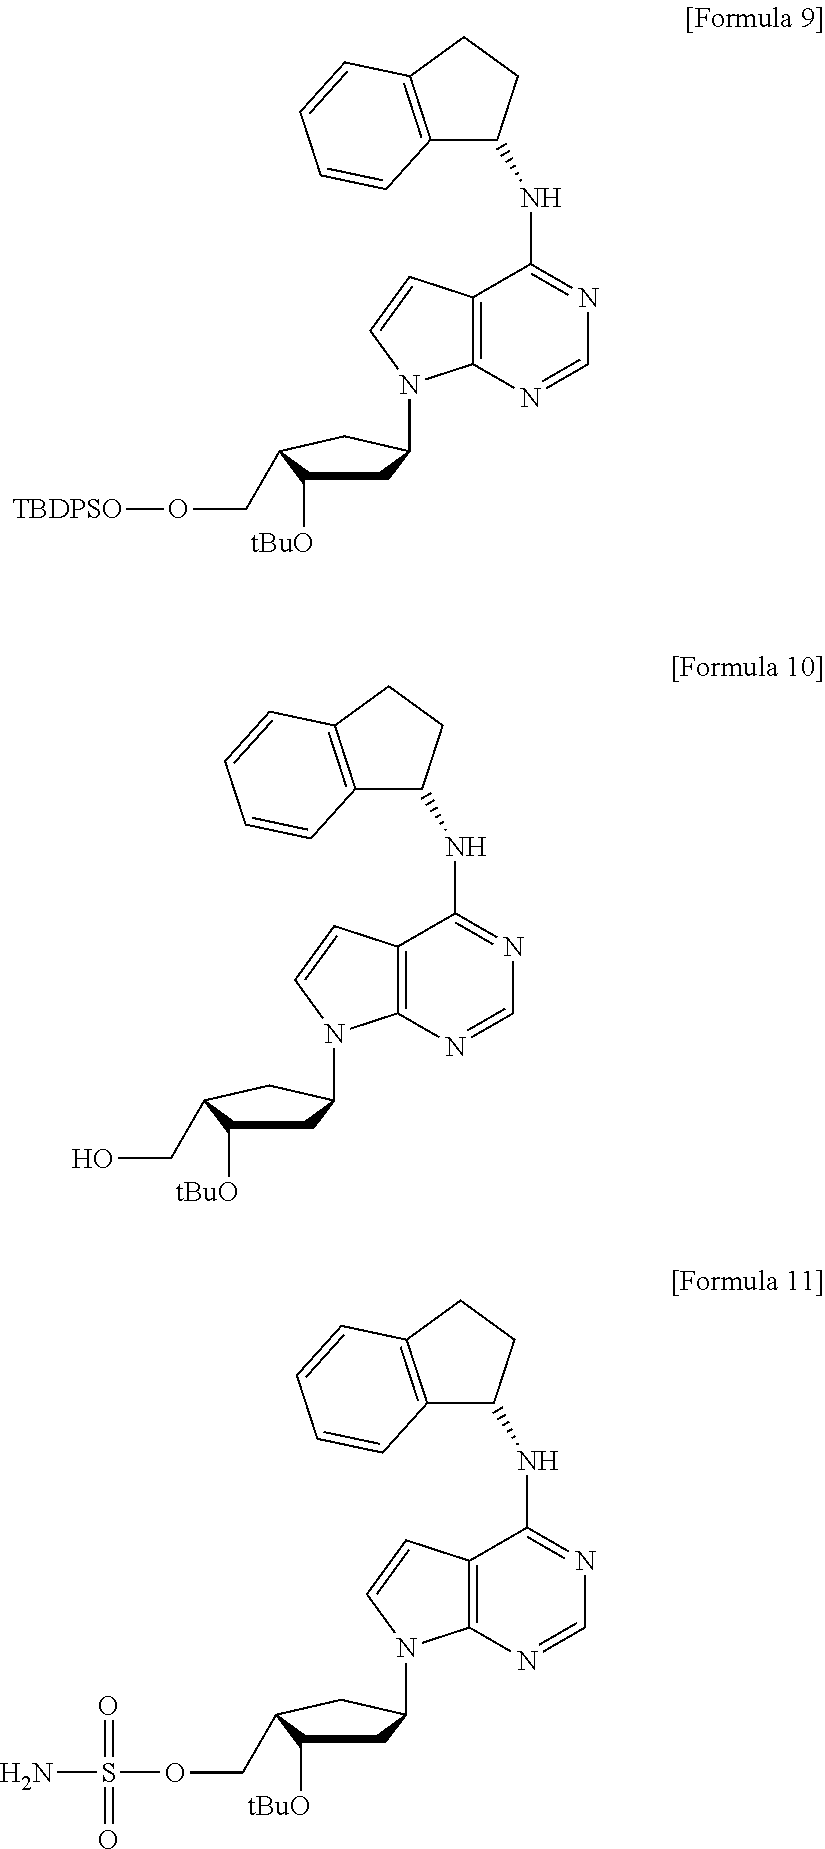 Preparation method of mln4924 as an e1 activating inhibitor